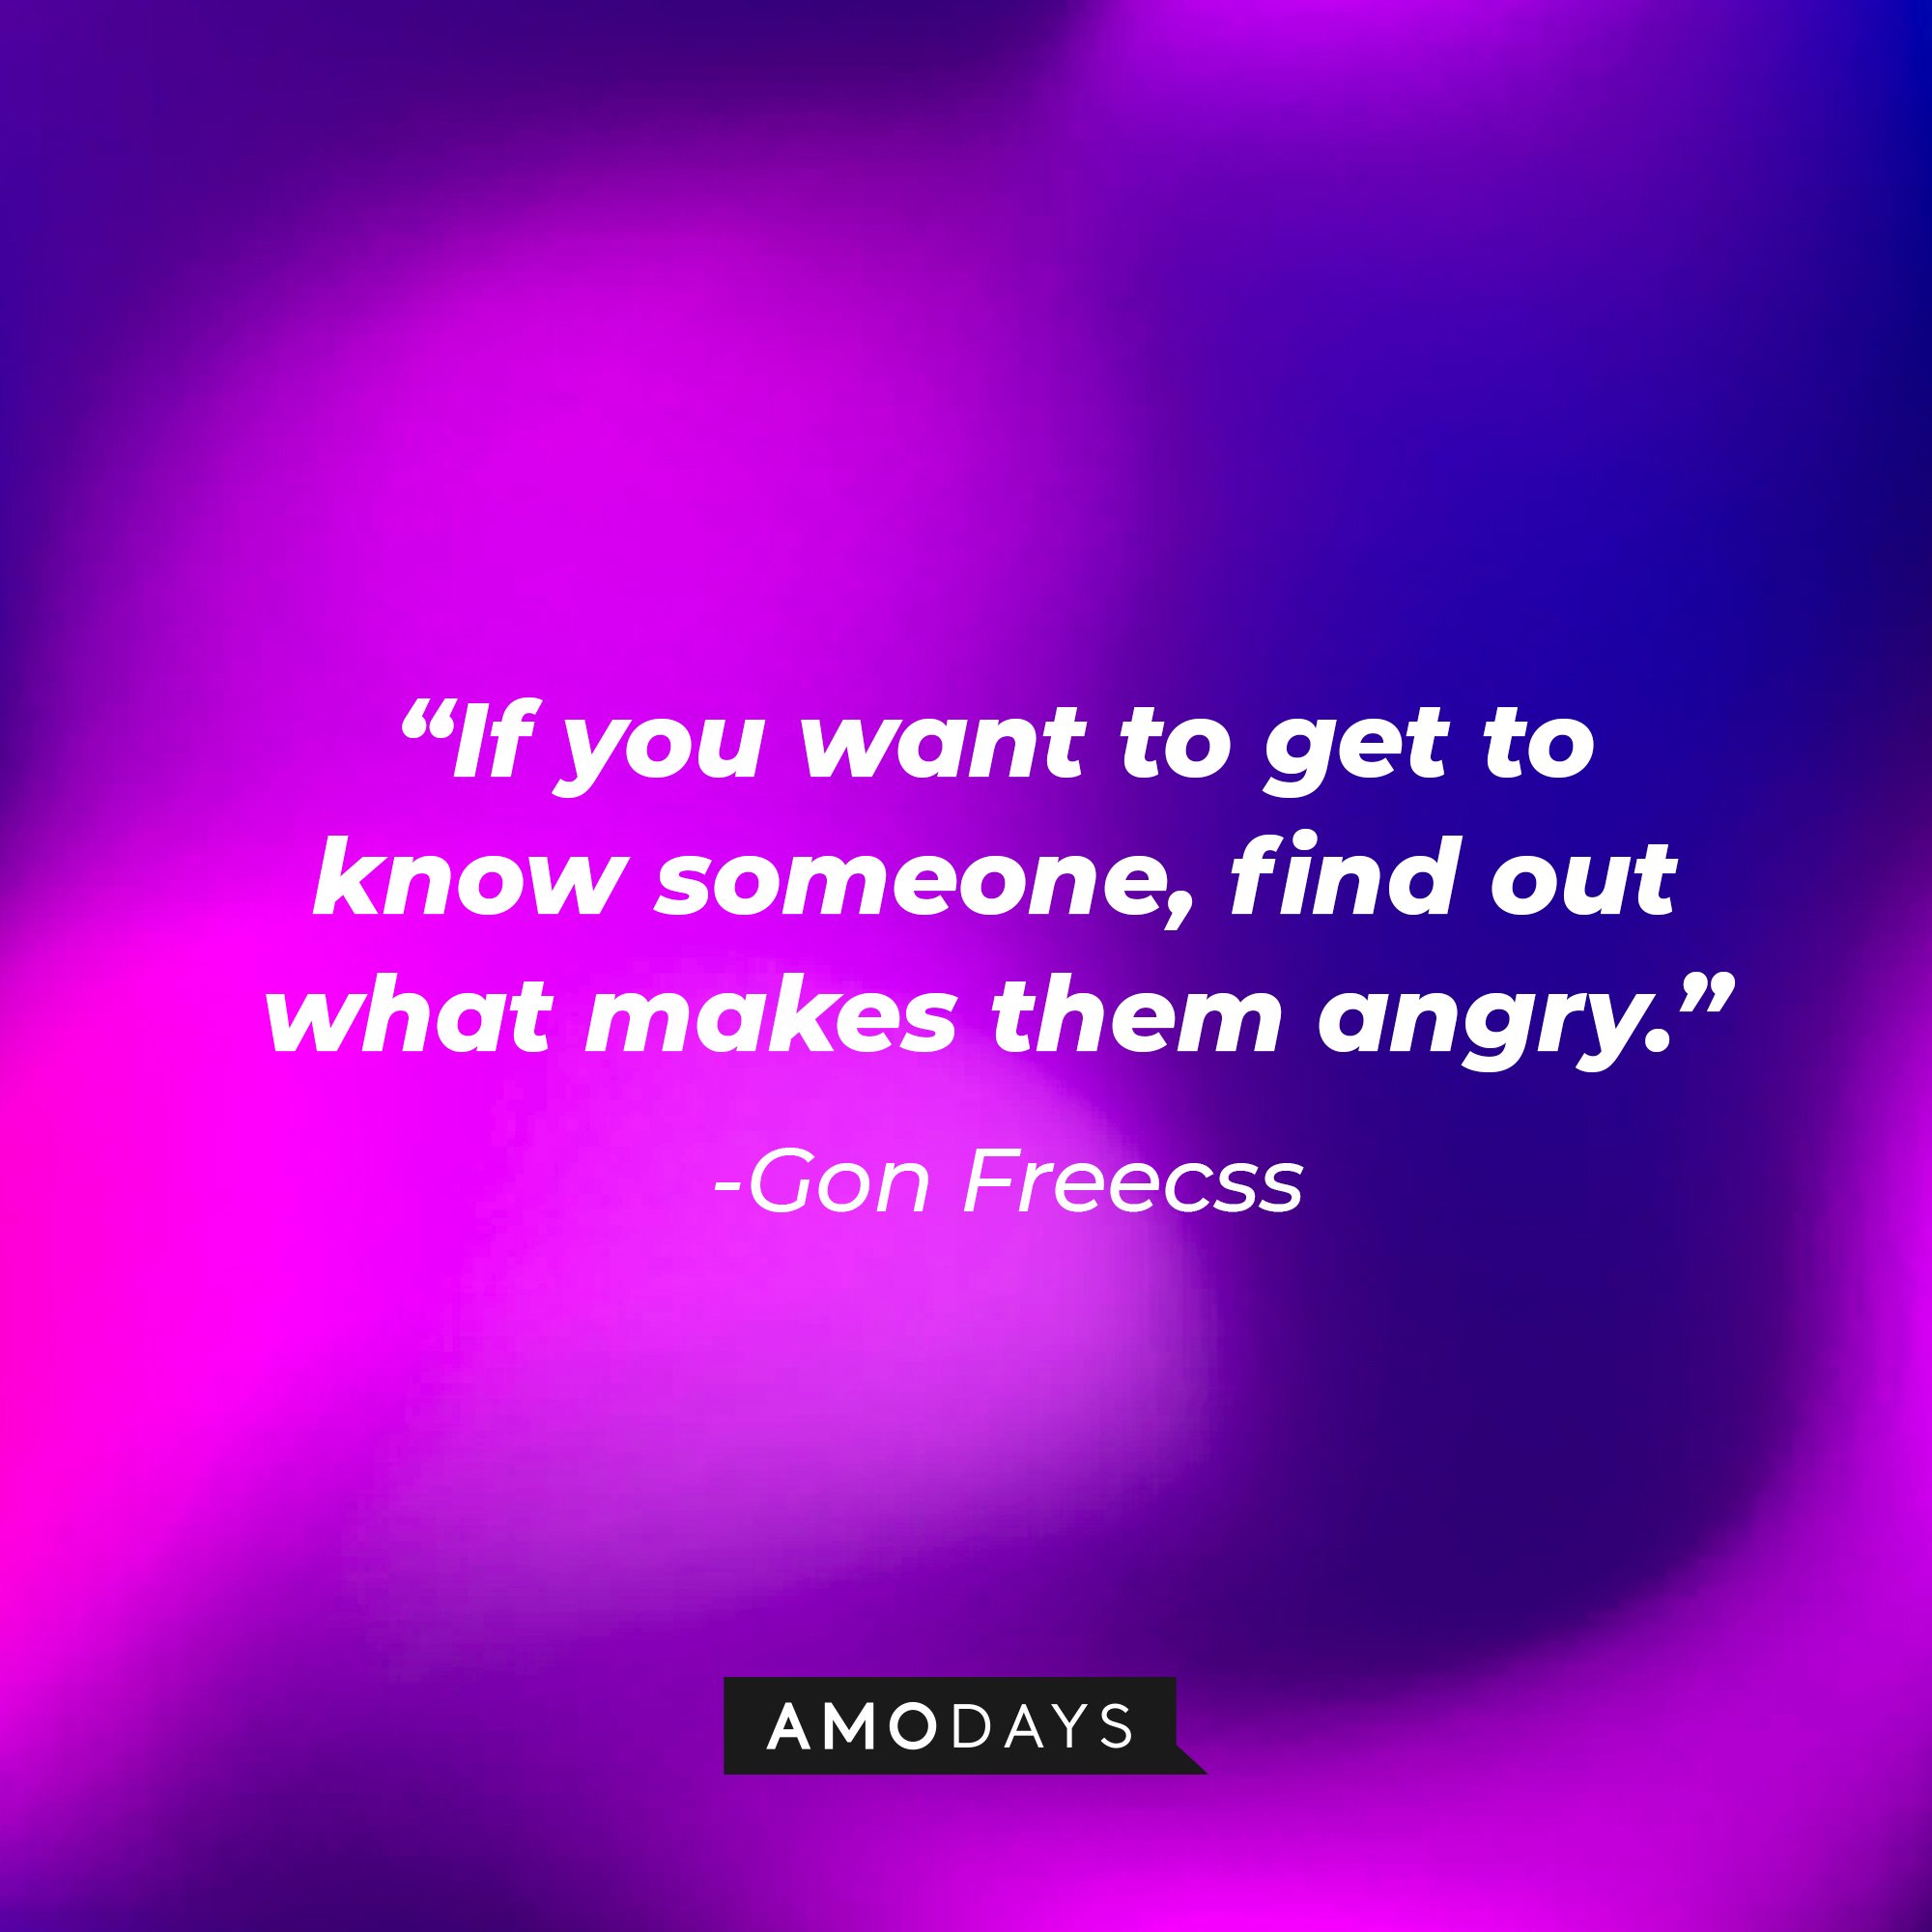 Gon Freecss' quote: "If you want to get to know someone, find out what makes them angry." | Image: AmoDays 